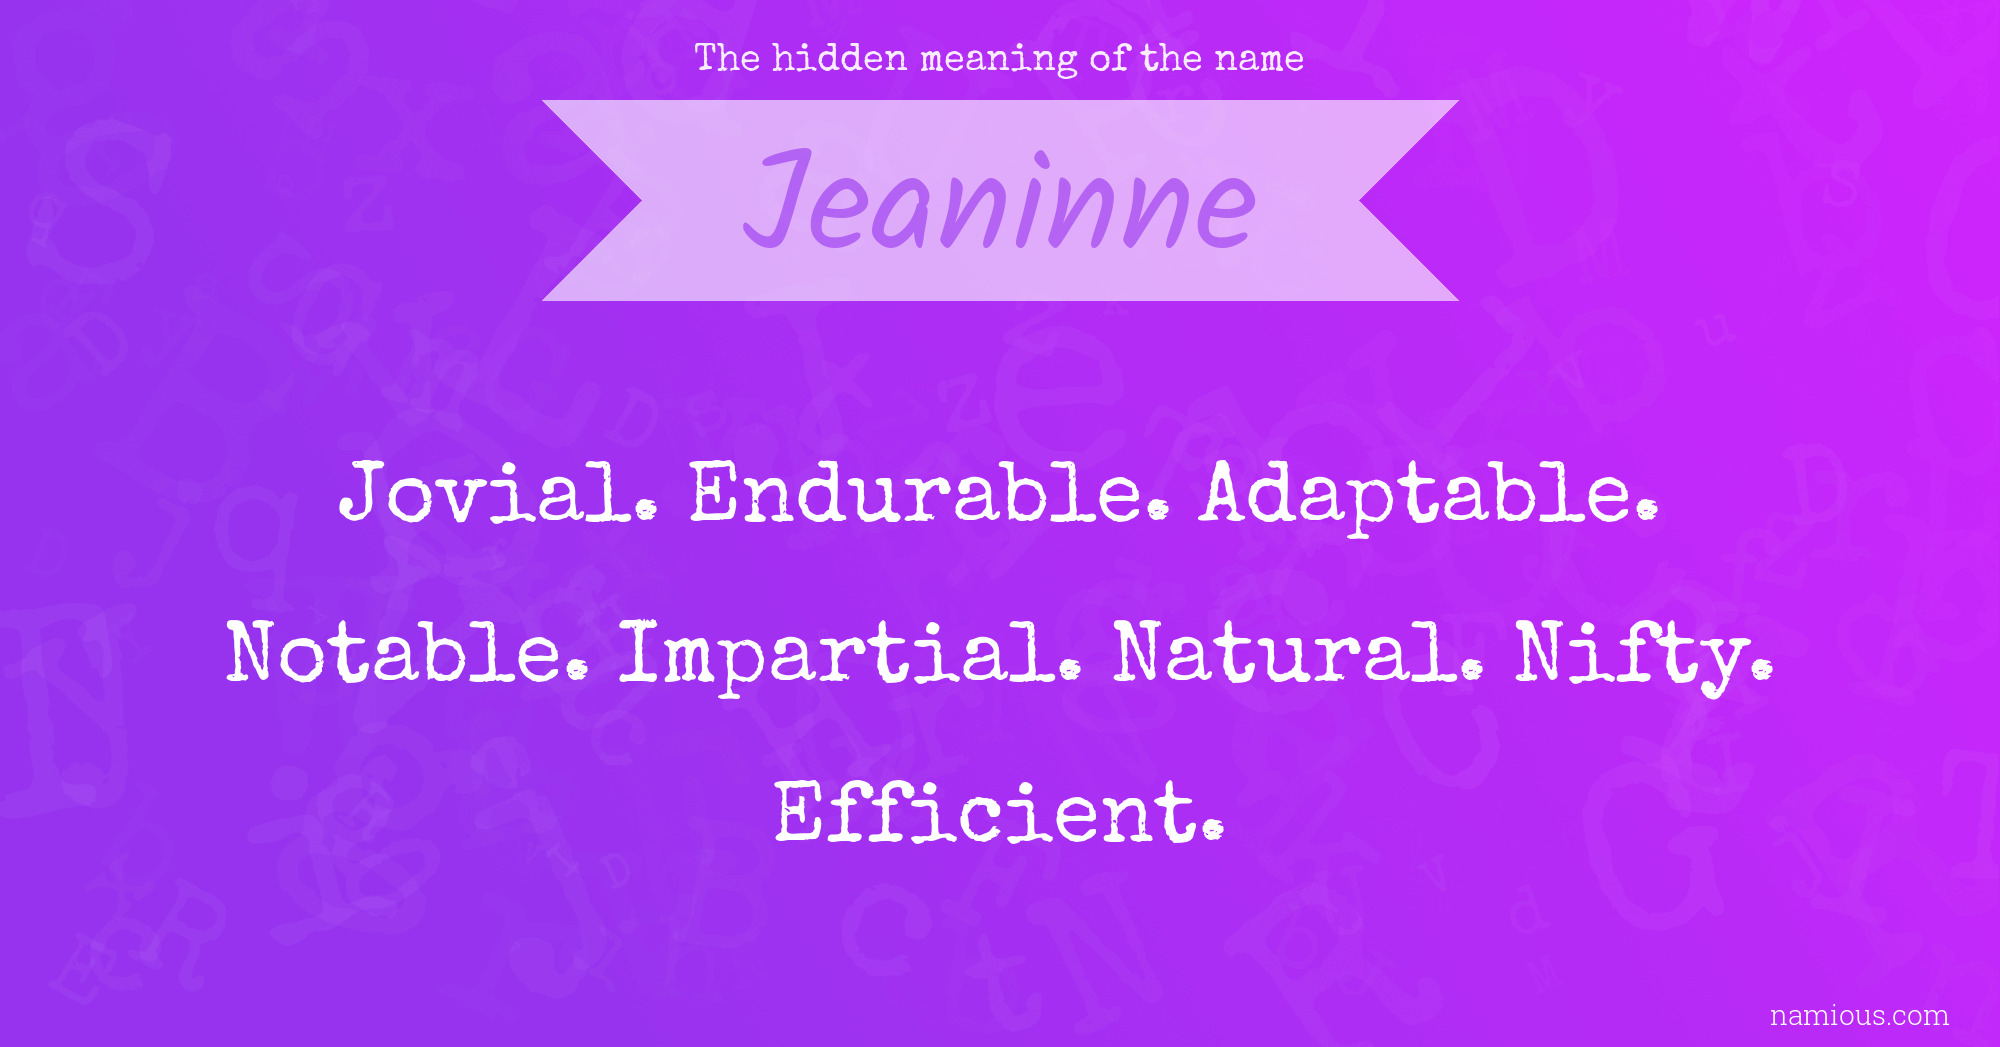 The hidden meaning of the name Jeaninne